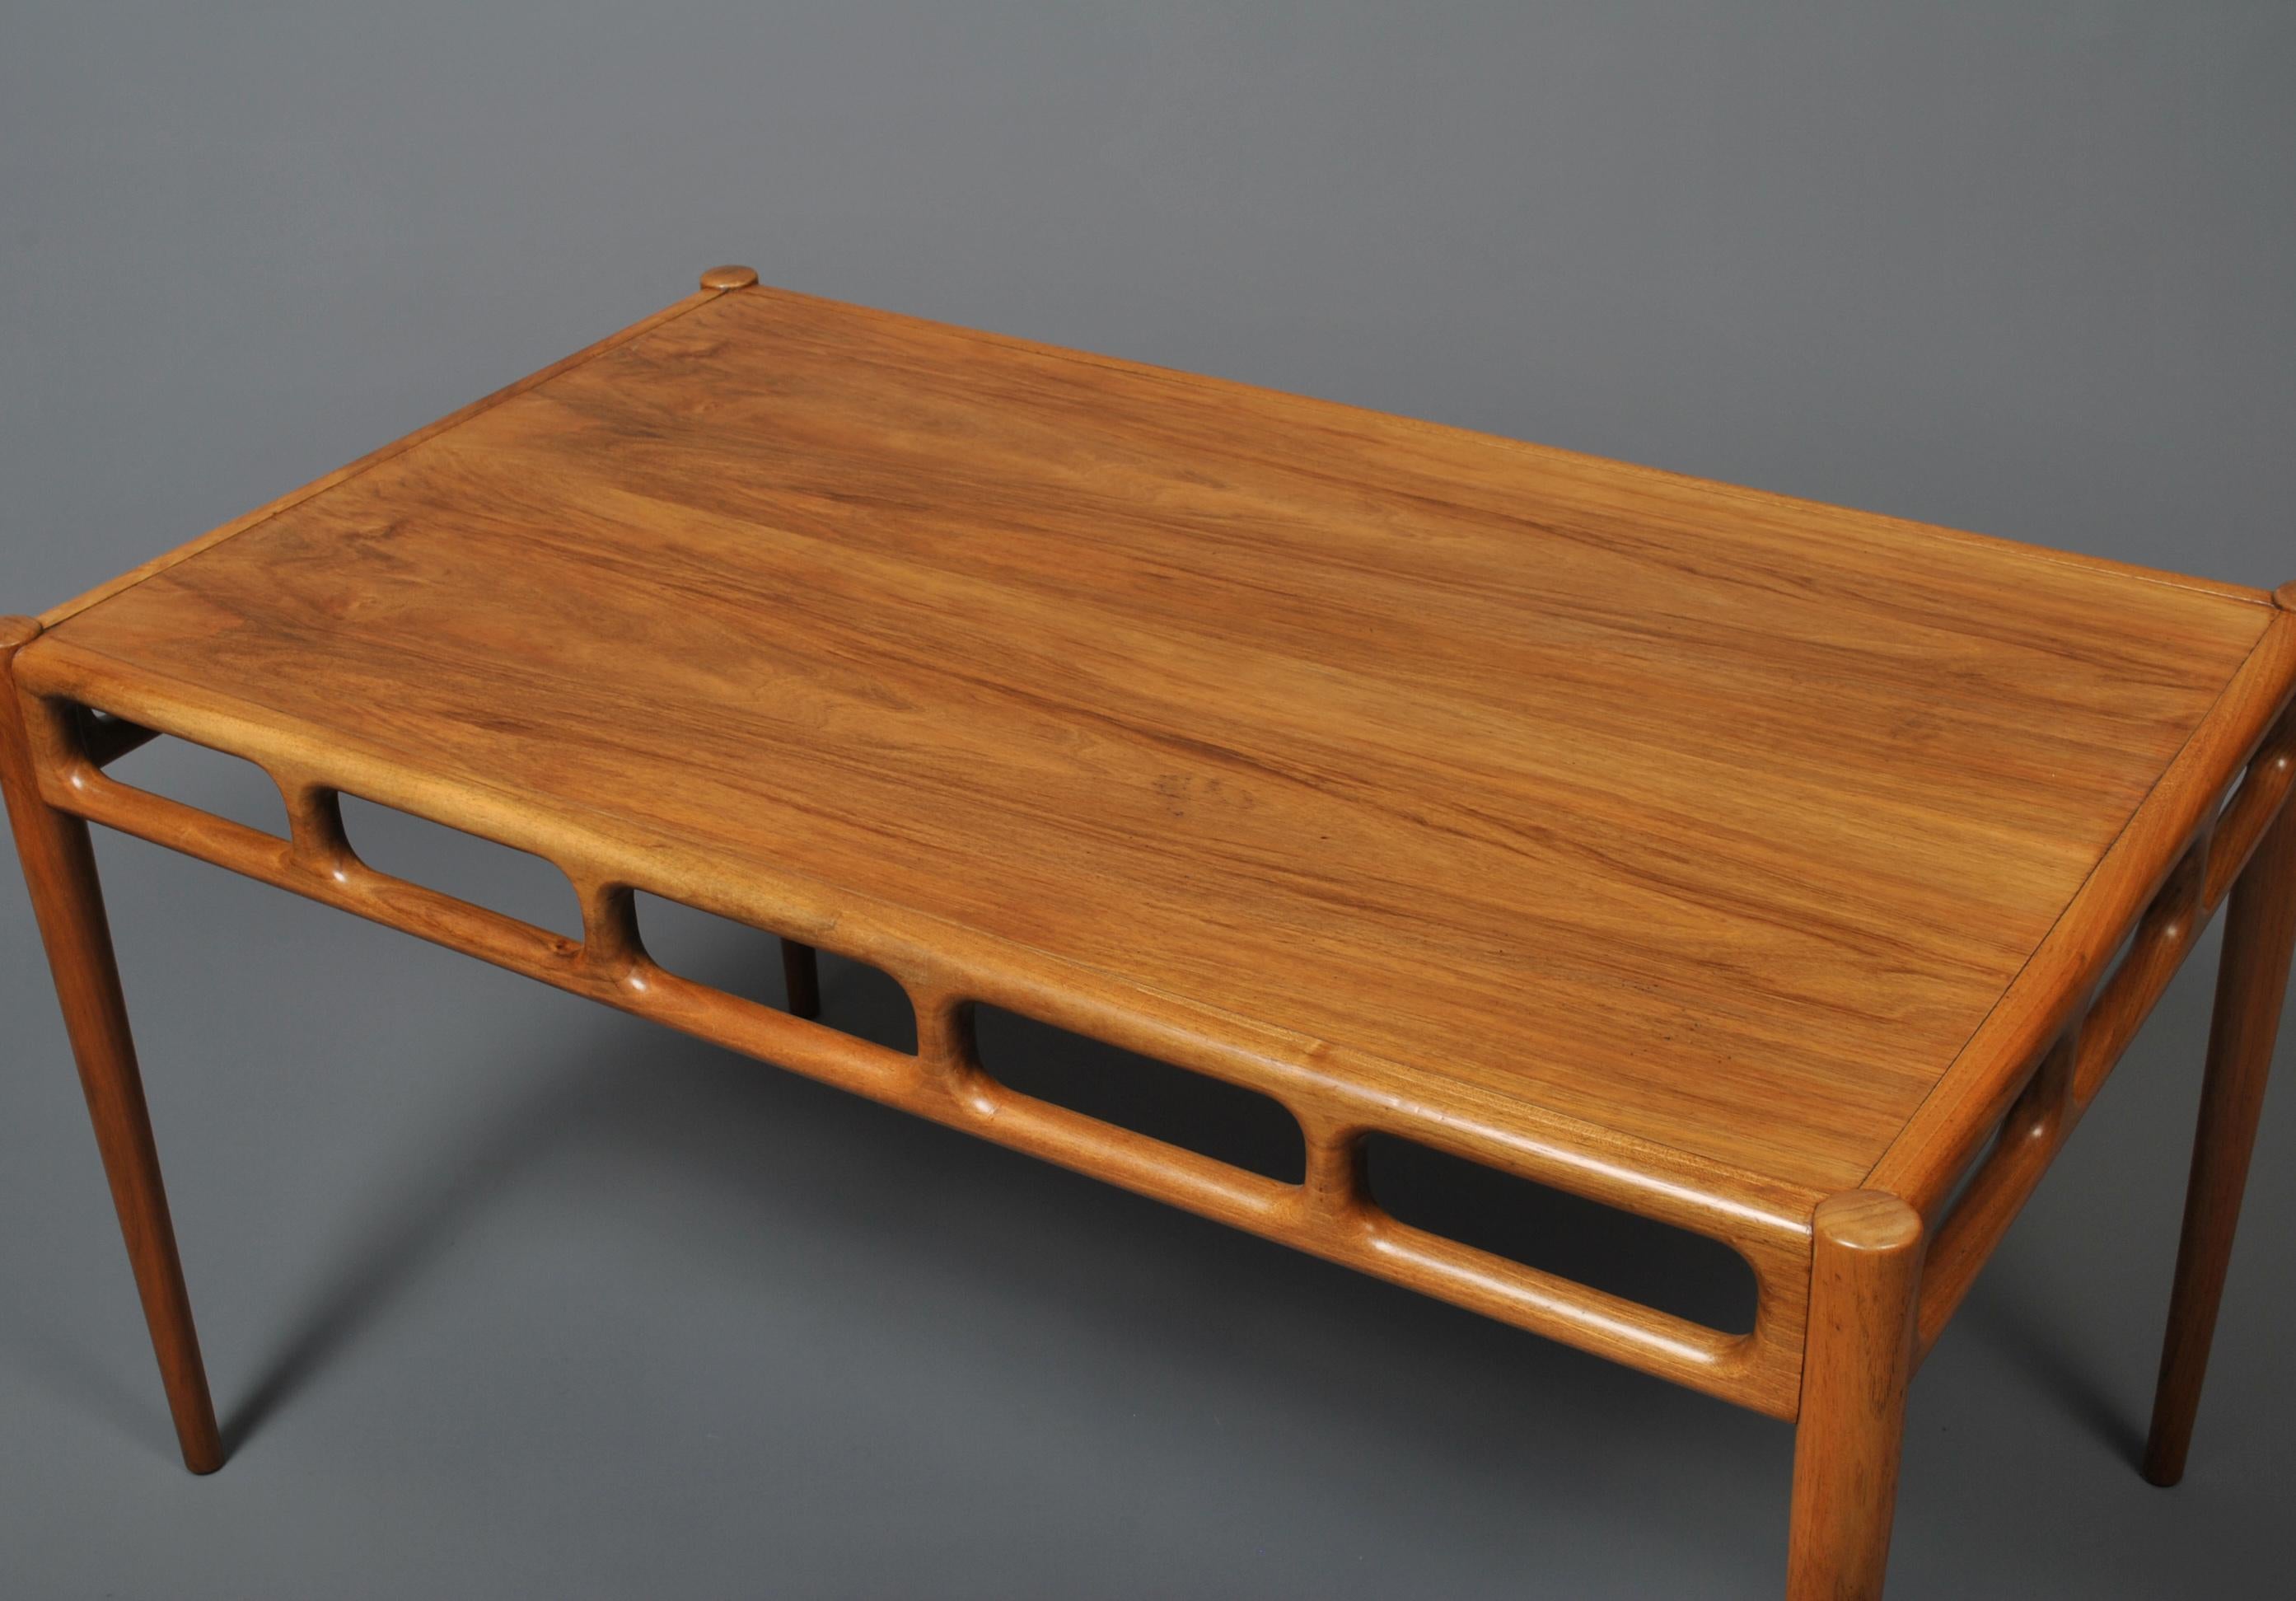 A European walnut sofa table by Ejnar Pedesen for William Watting from the late 1950s. 
An elegant Midcentury Danish piece.